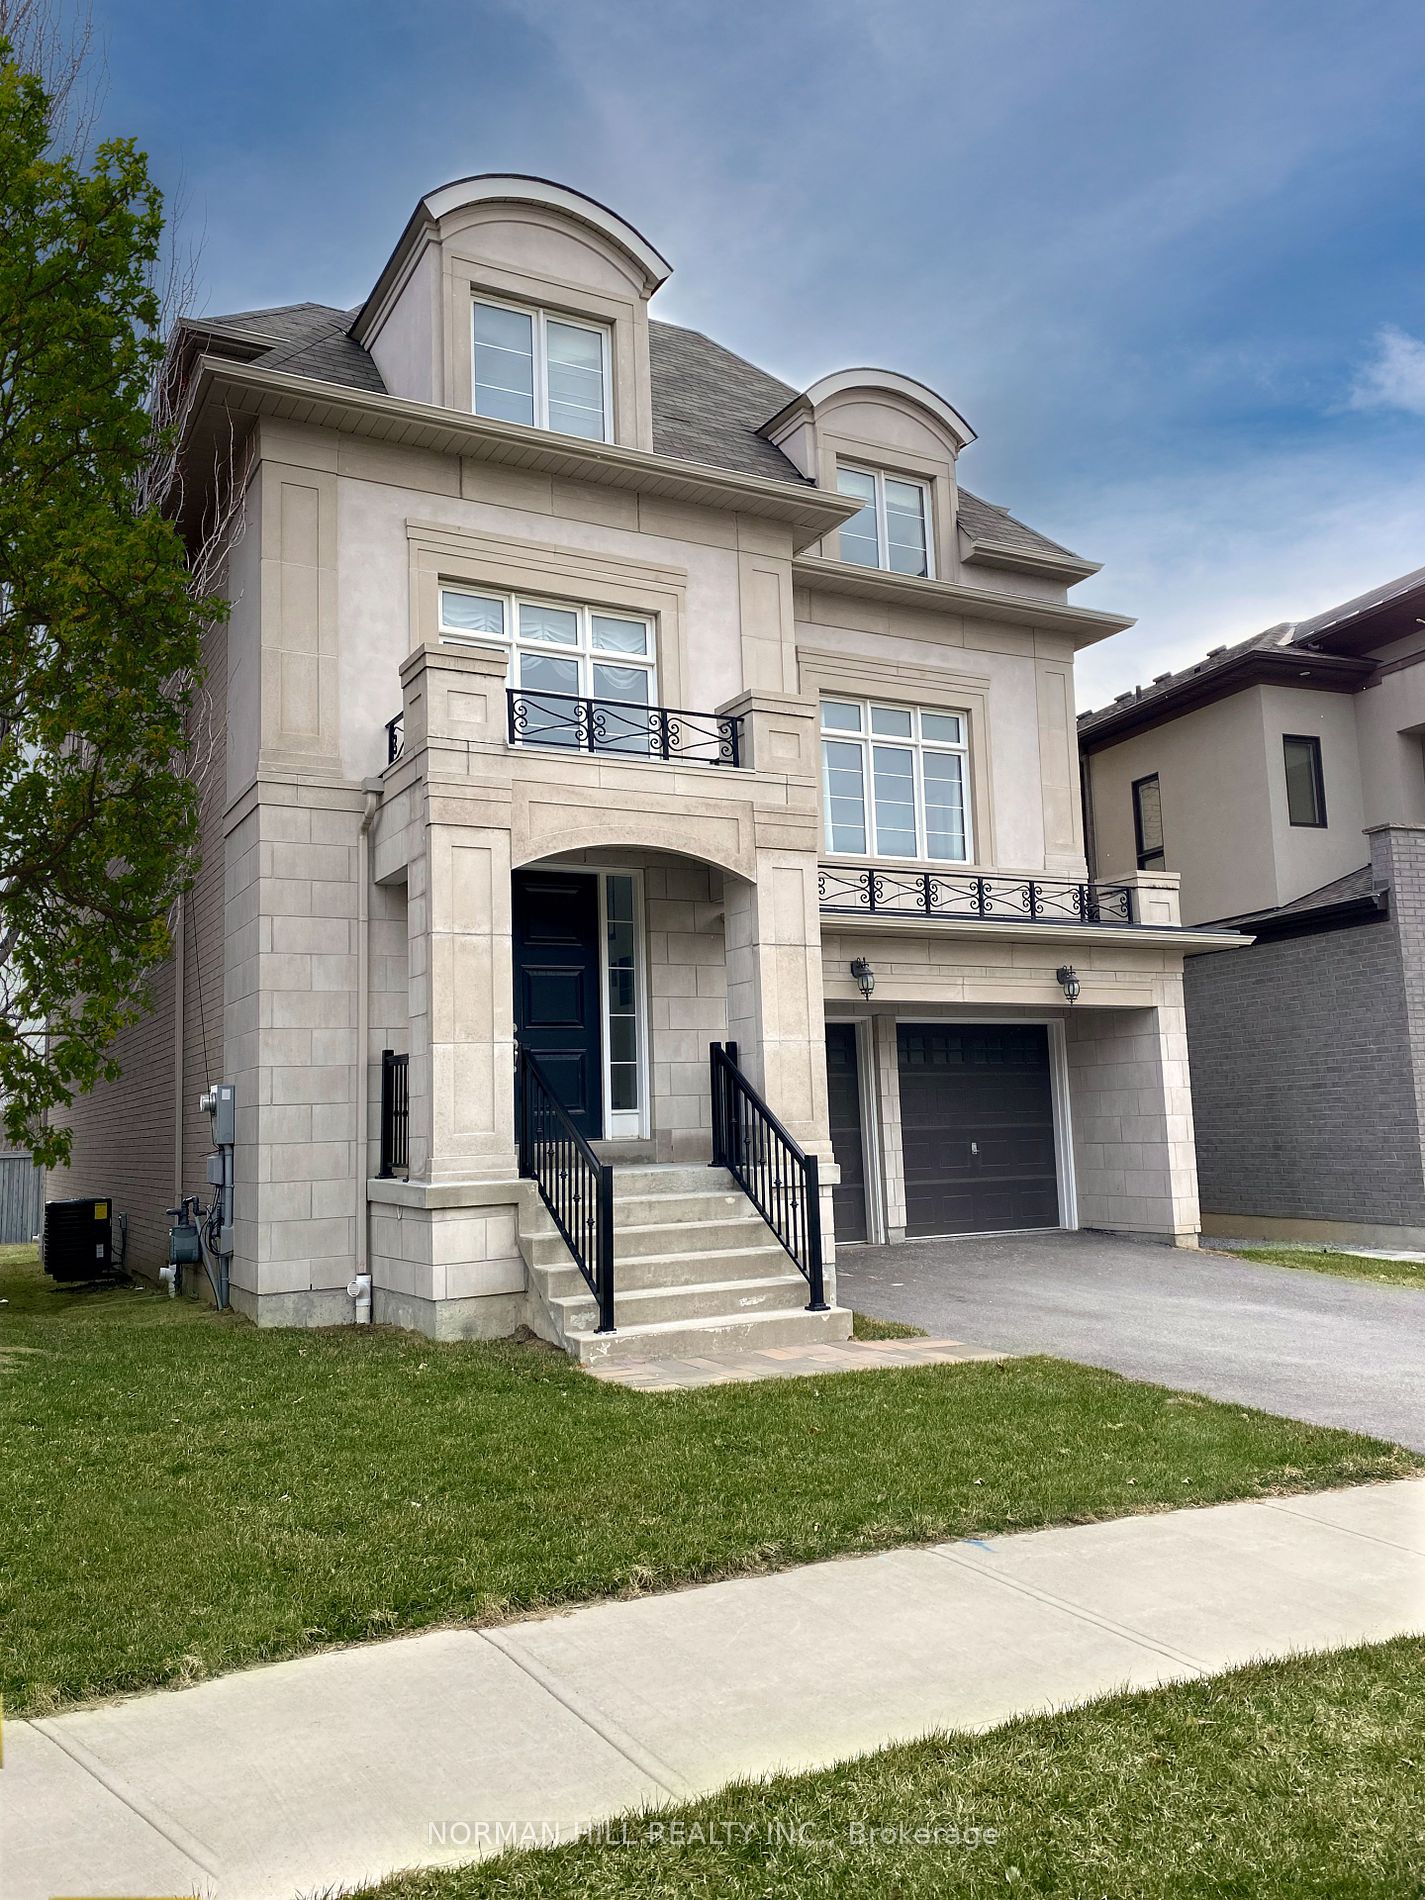 Detached house for sale at 57 Keatley Dr Vaughan Ontario